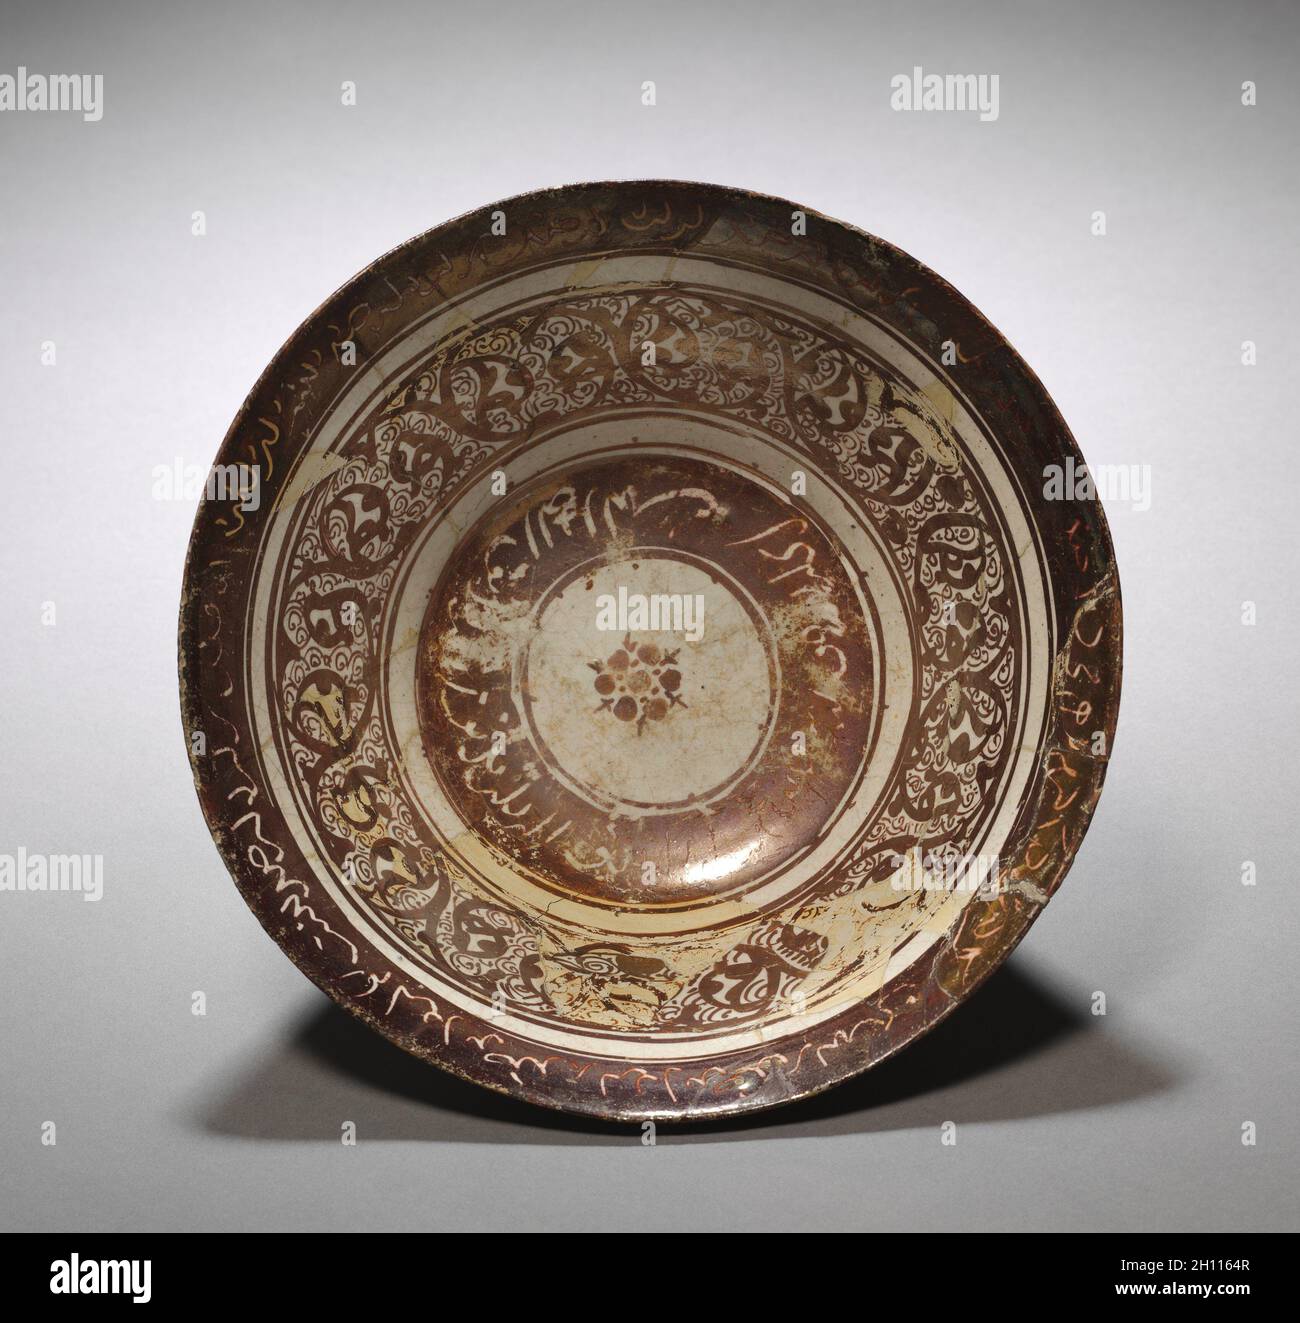 Bowl, early 1200s. Iran, Kashan, Seljuq period of Iran (1037–1194). Fritware with luster-painted design; overall: 9.8 x 21.5 cm (3 7/8 x 8 7/16 in.). Stock Photo